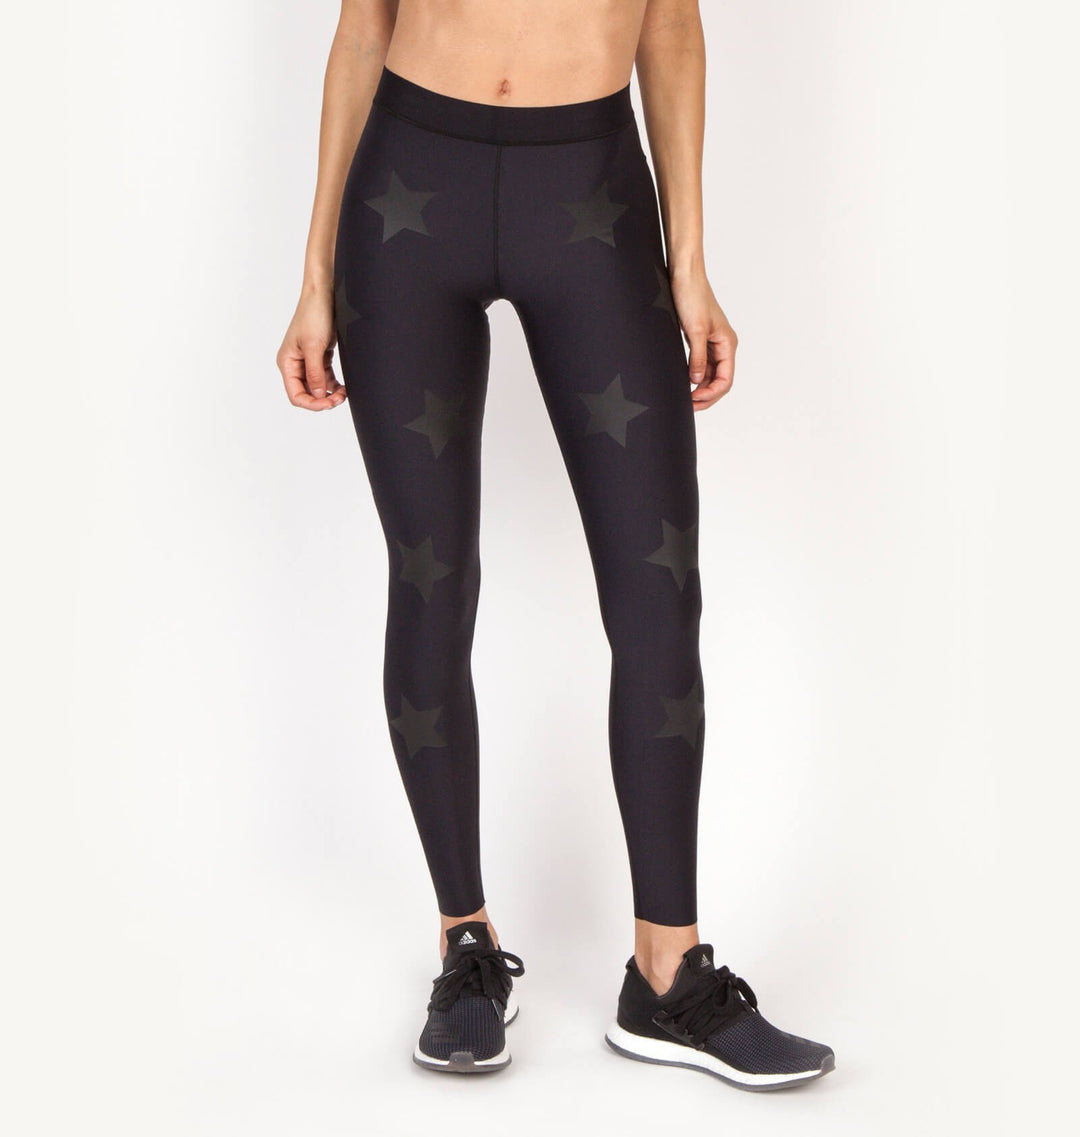 Ultracor - Ultra High Lux Knockout Print Leggings